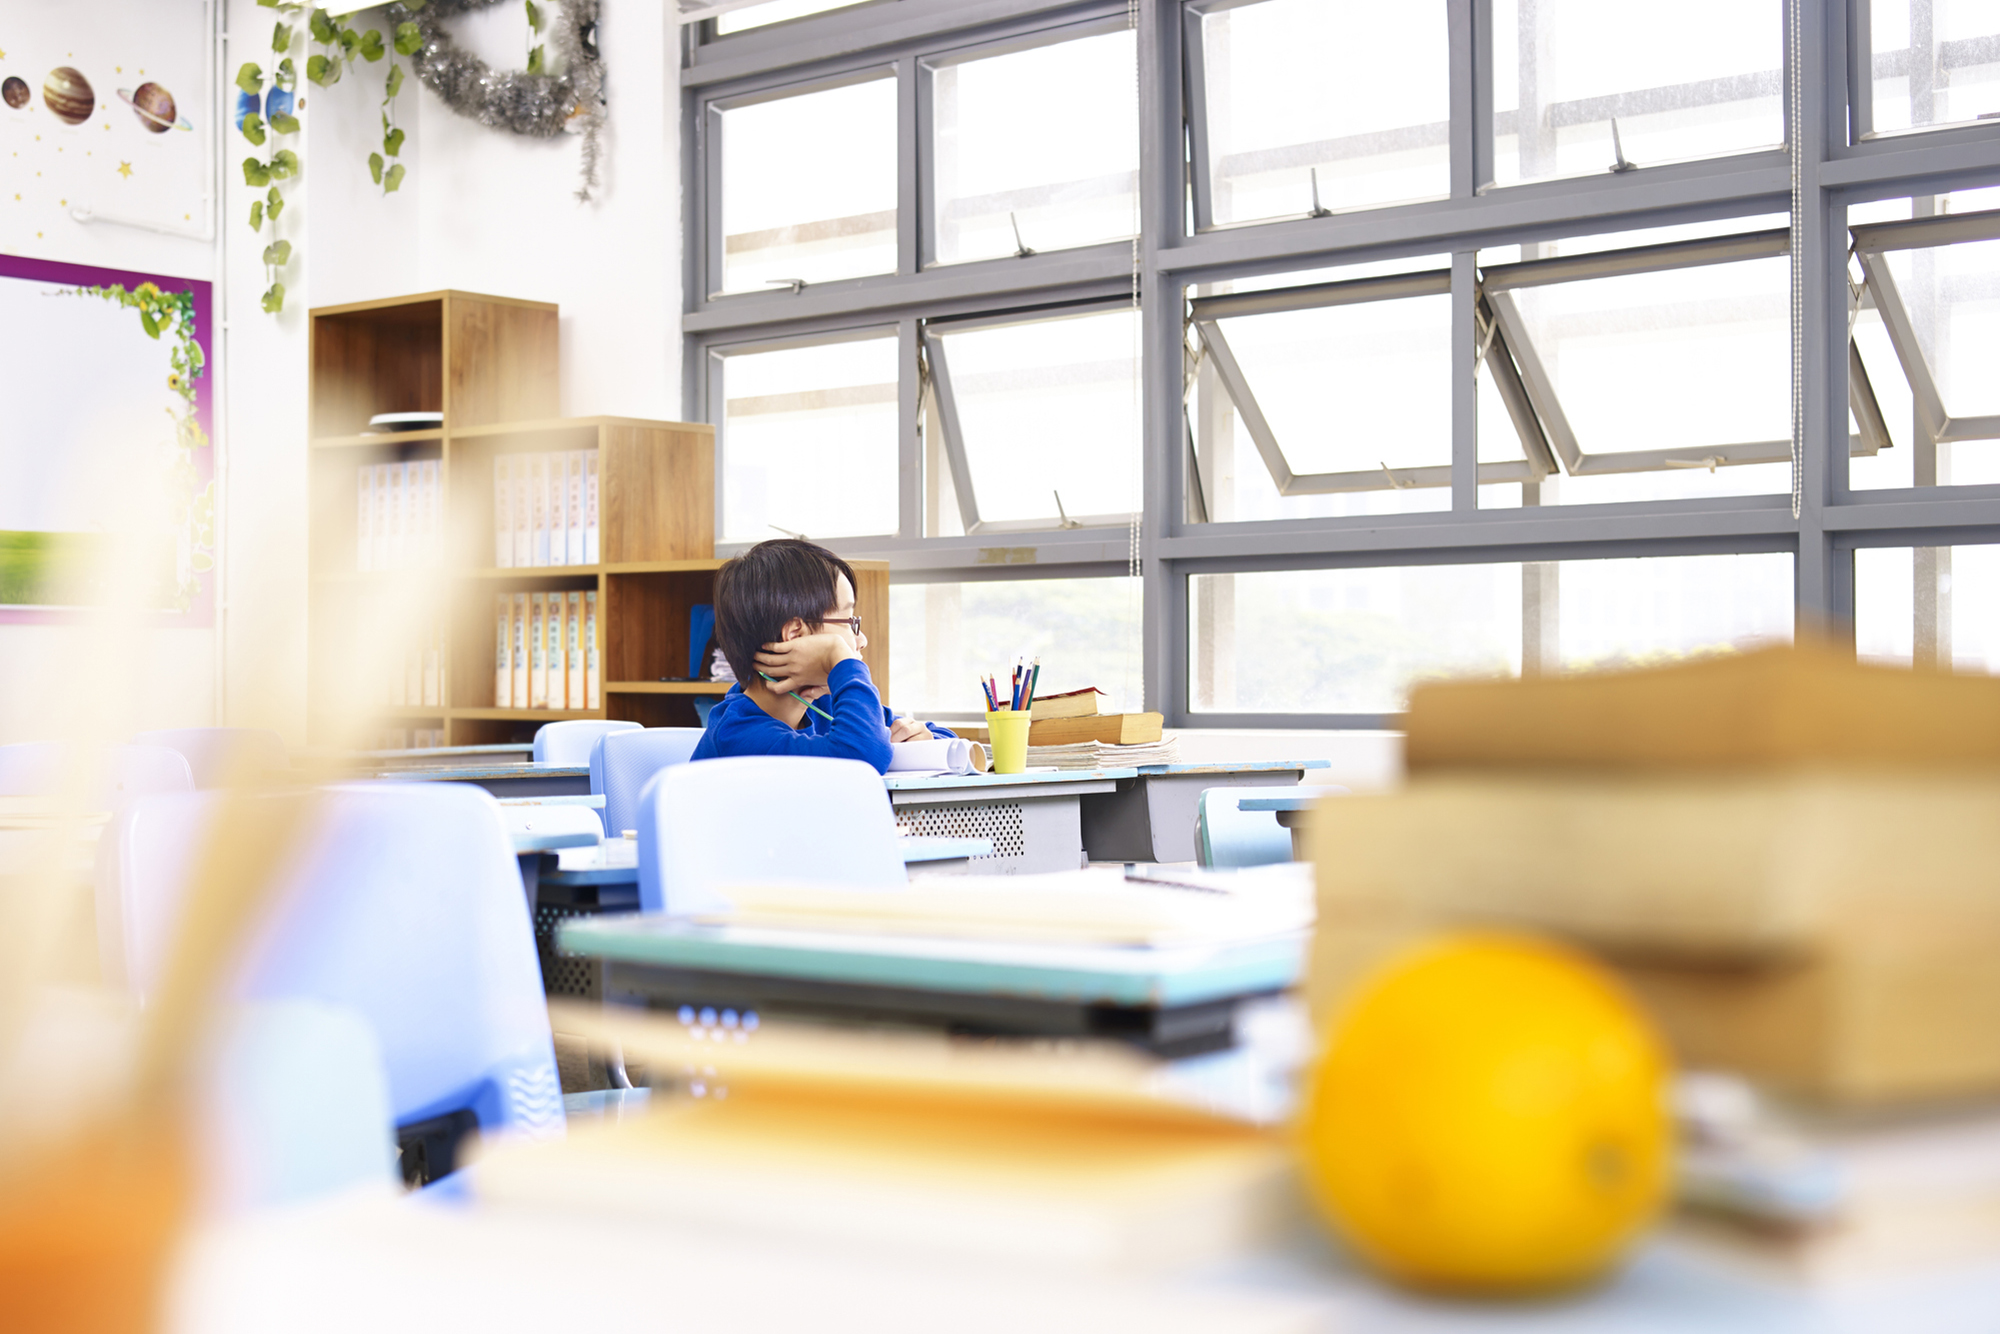 A young student looks out the window of a classroom with several empty desks.